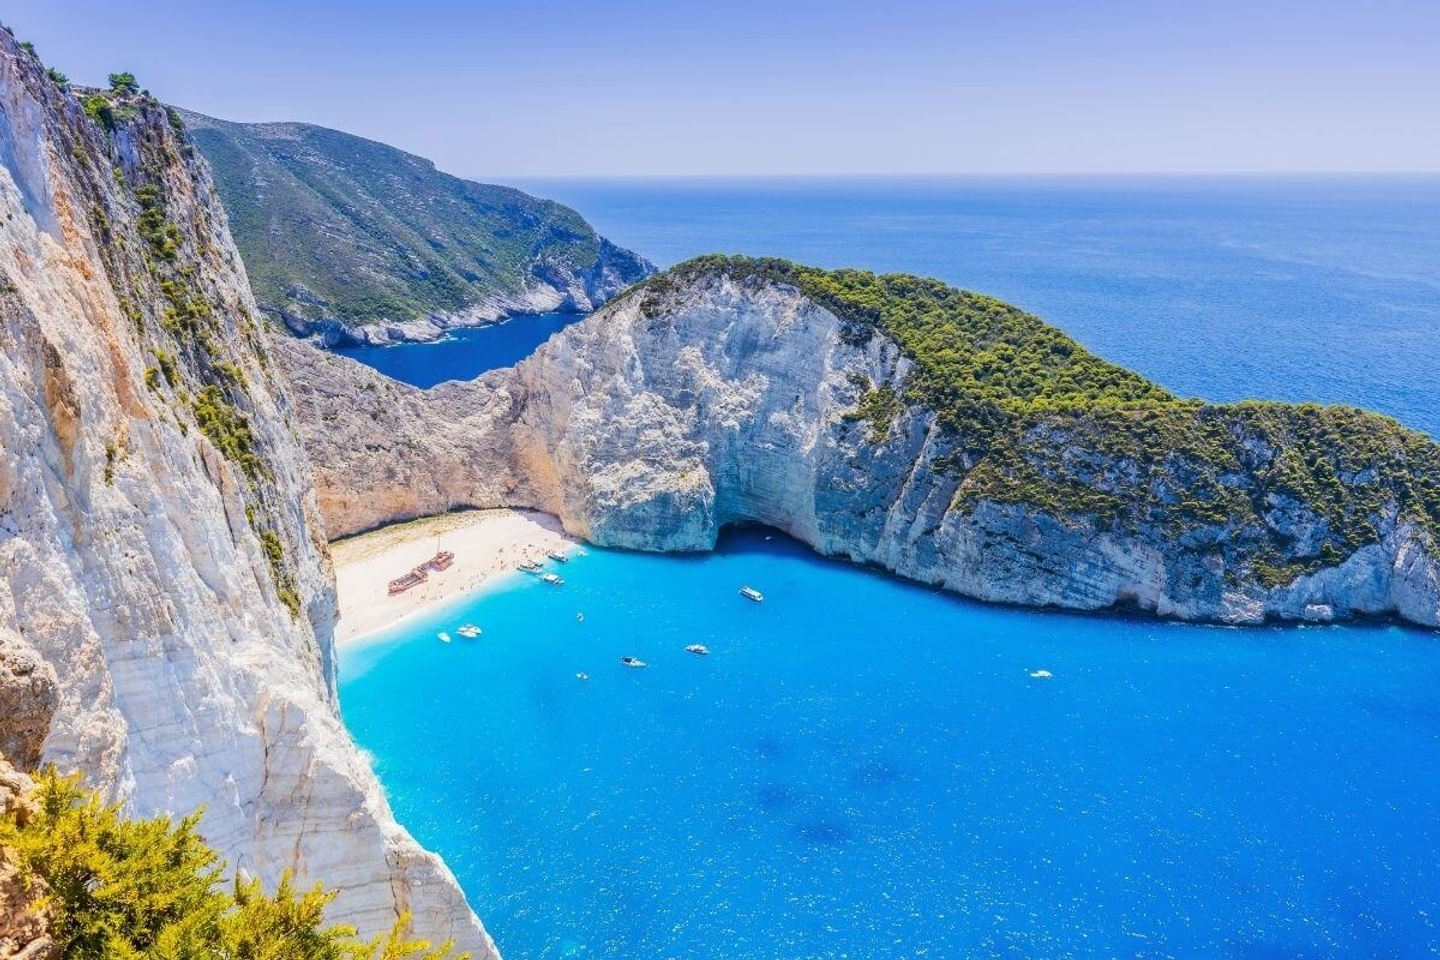 Planning a Trip to Greece?